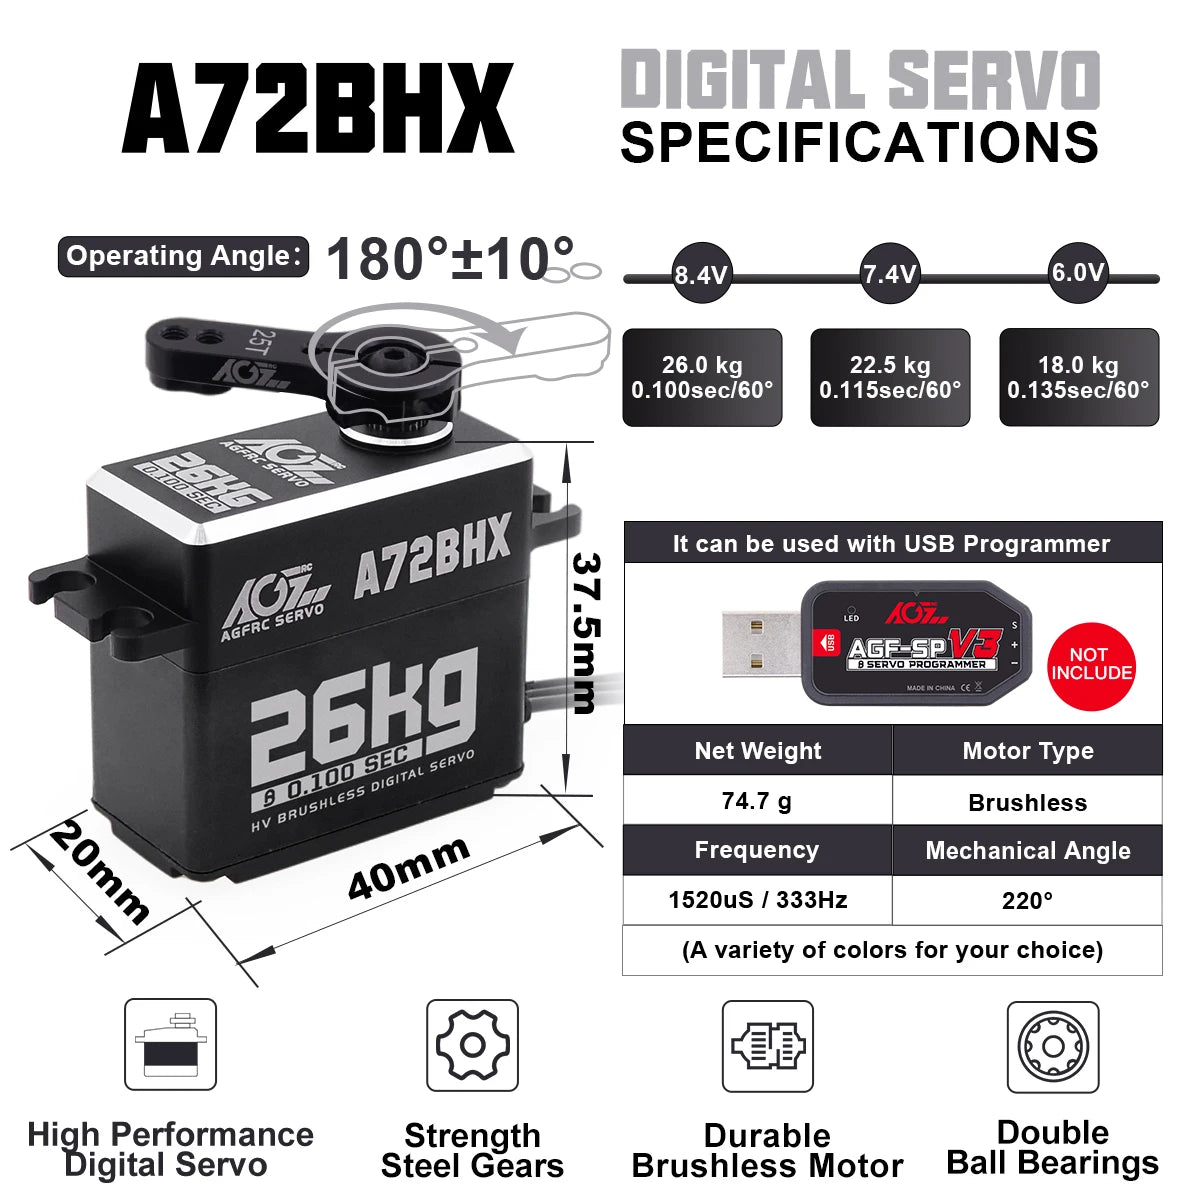 AGFRC A72BHX, AZ2BHX digital SerVQ SPECIFICATIONS Operating Angle:)